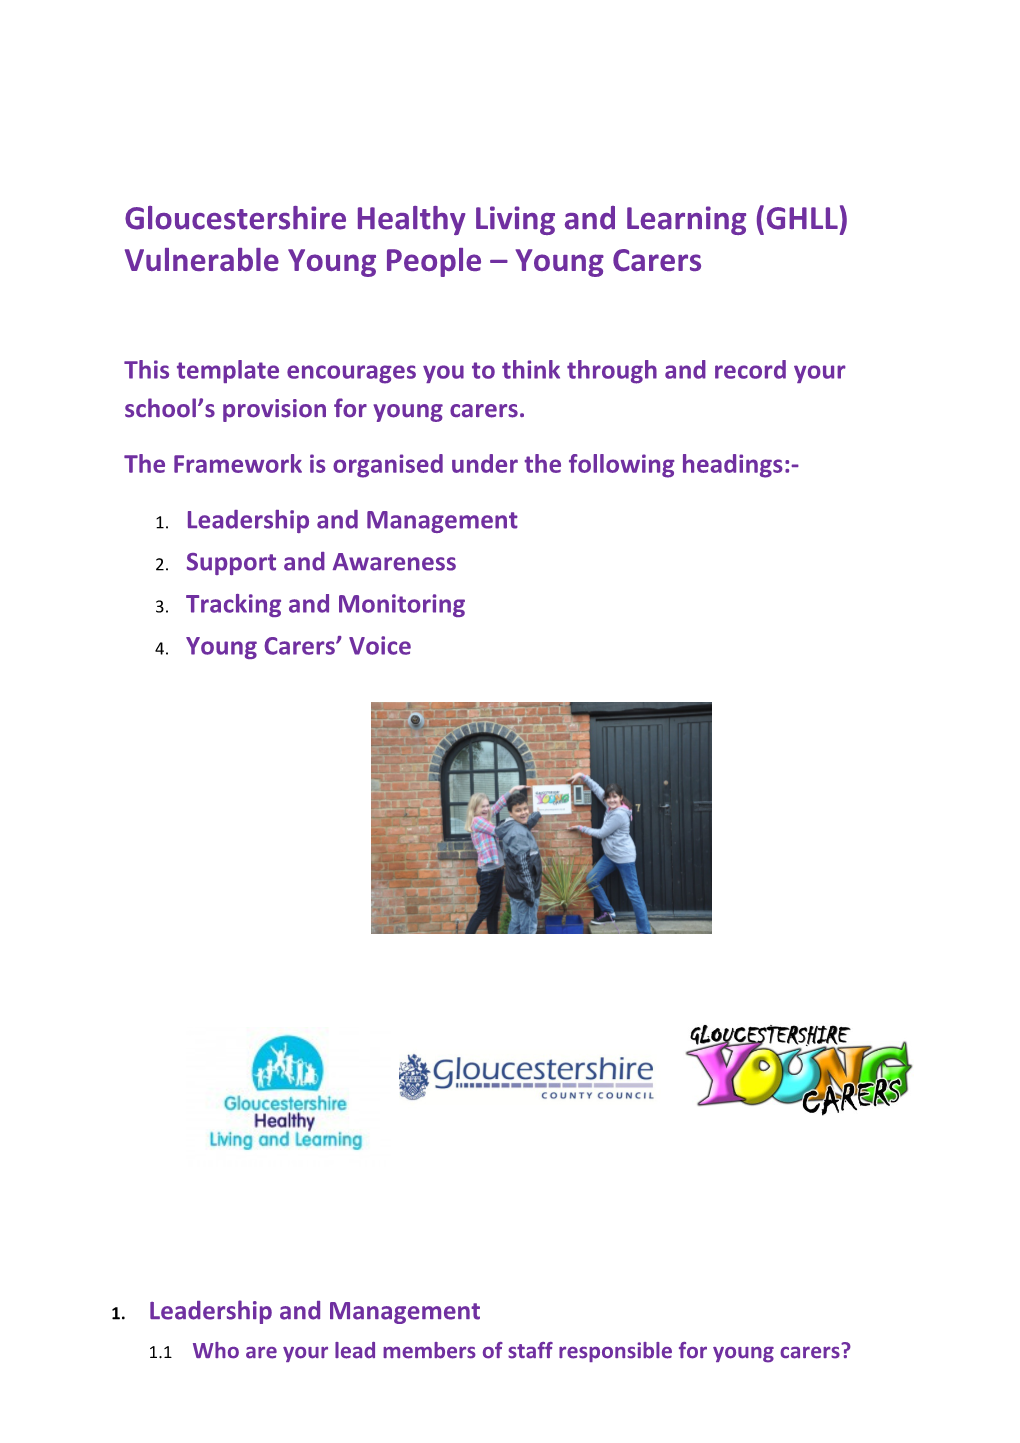 Gloucestershire Healthy Living and Learning (GHLL) Vulnerable Young People Young Carers